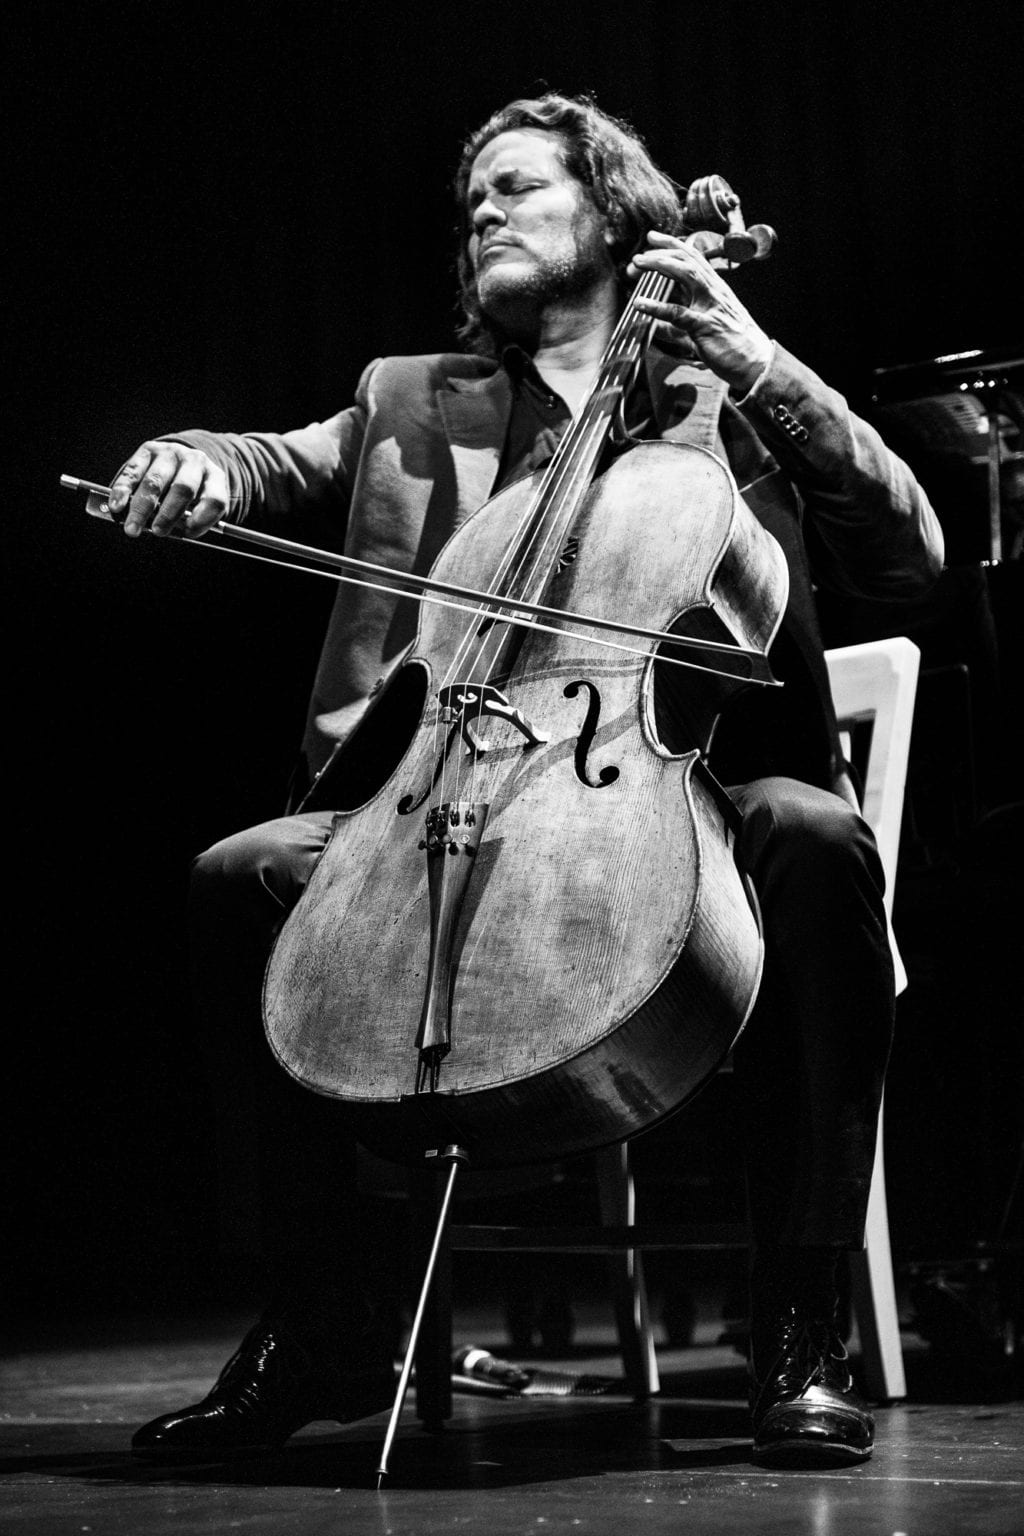 Grammy-winning classical cellist Zuill Bailey played pieces by Bach and others at the North Star Theater on Monday, Sept. 9. Bailey was later joined onstage by pianist Alfredo Oyaguez. (Sept. 9, 2019) Photo by Zachary Snowdon Smith/The Cordova Times